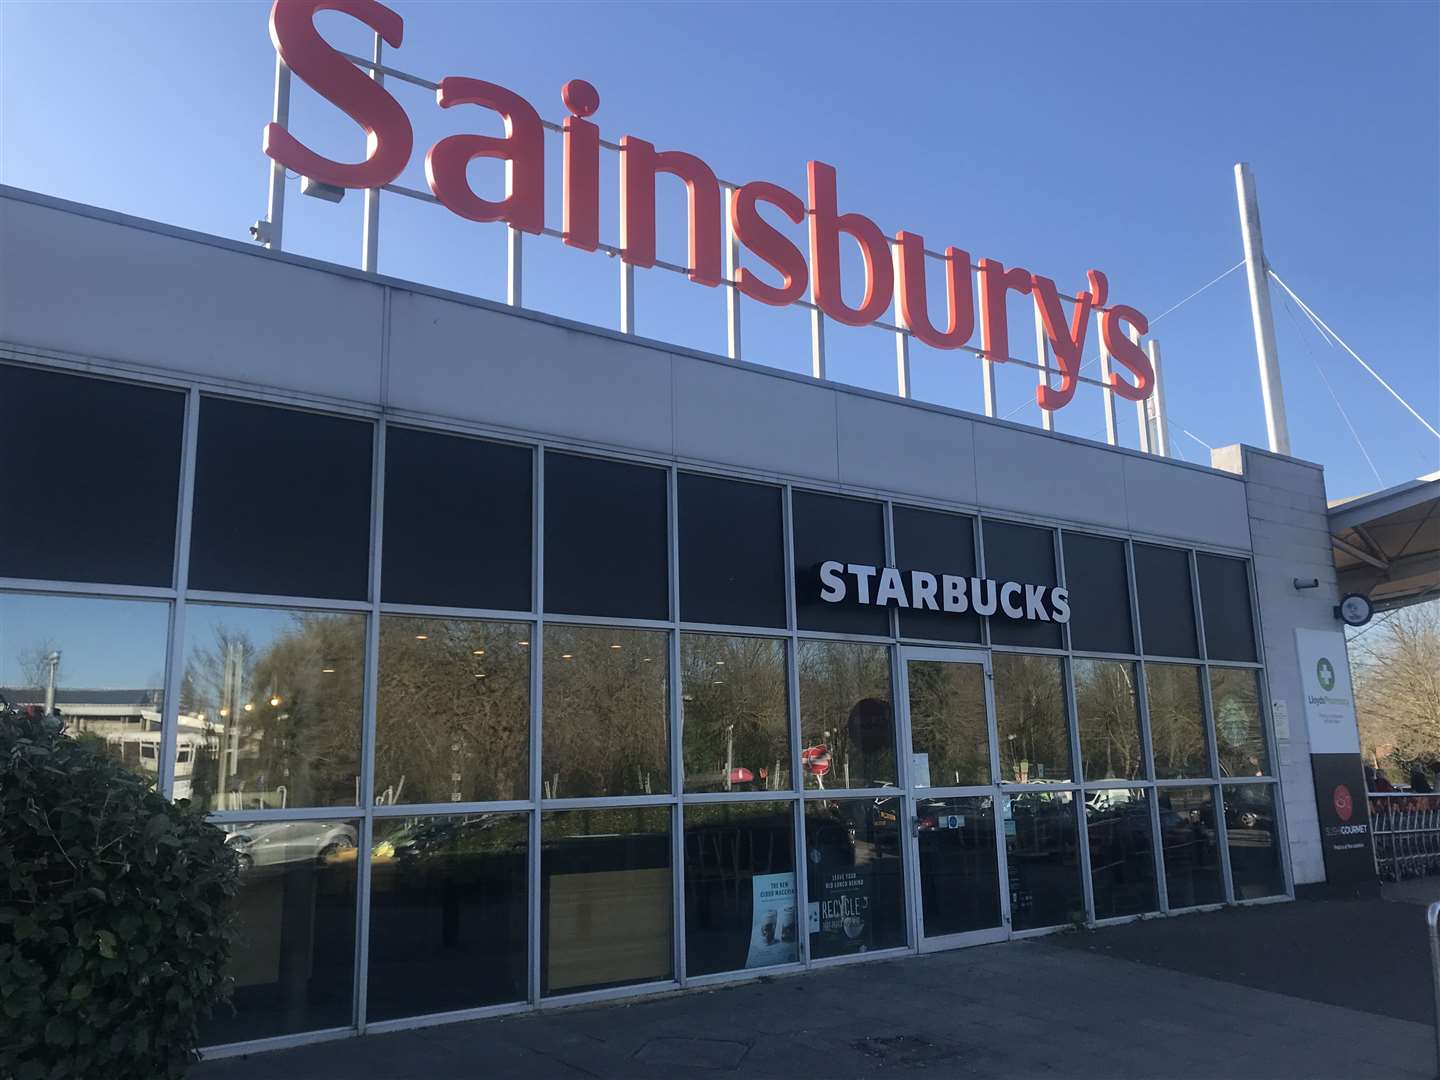 Sainsbury's say they are working hard to ensure customers can find what they need